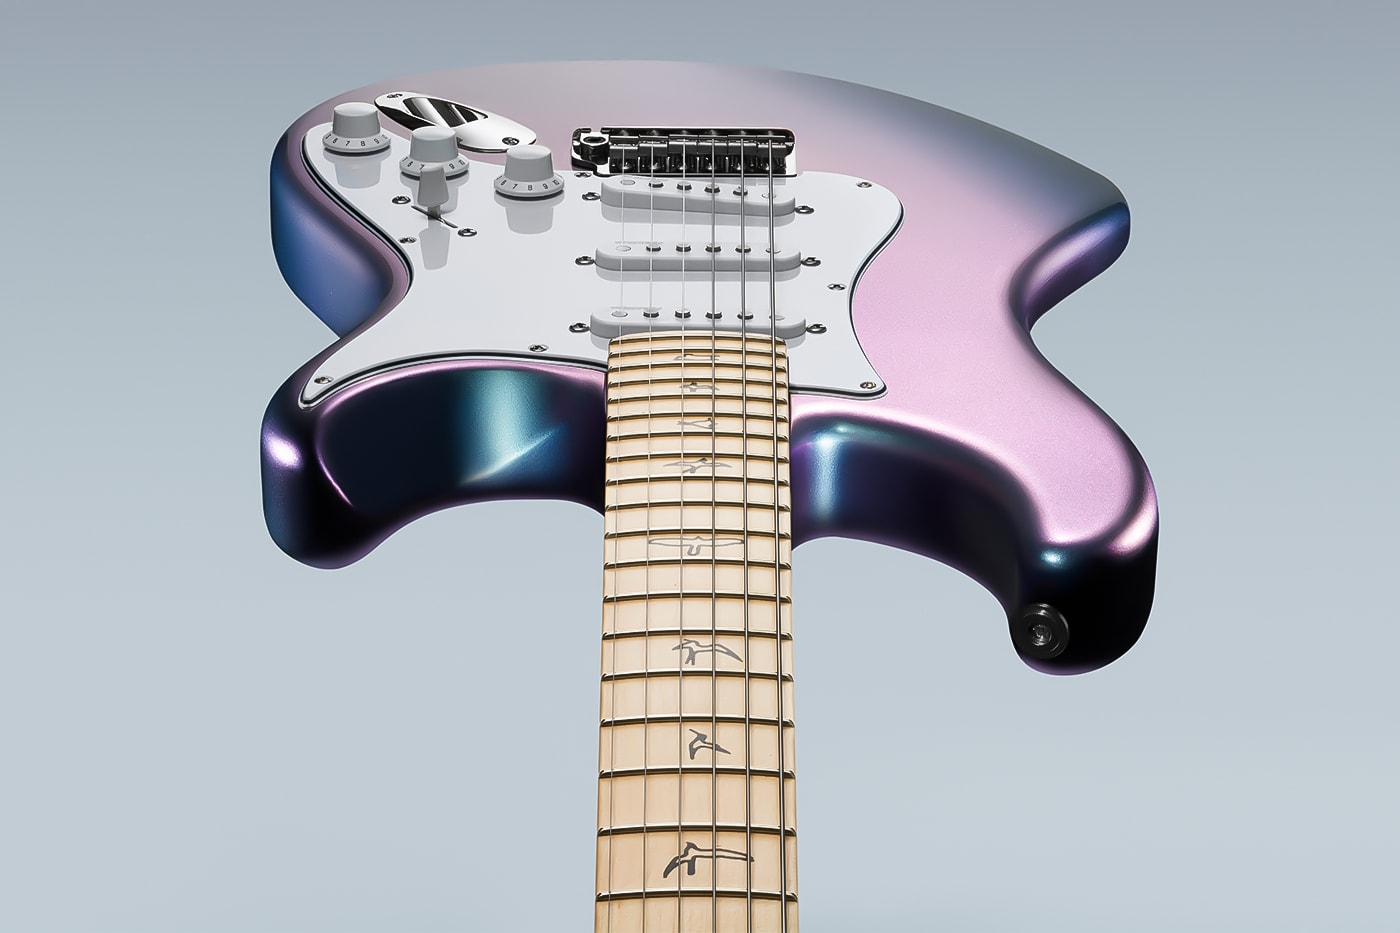 John Mayer PRS Guitars Silver Sky Guitar Limited Edition Release Info Buy Price polychromatic Lunar Ice finish